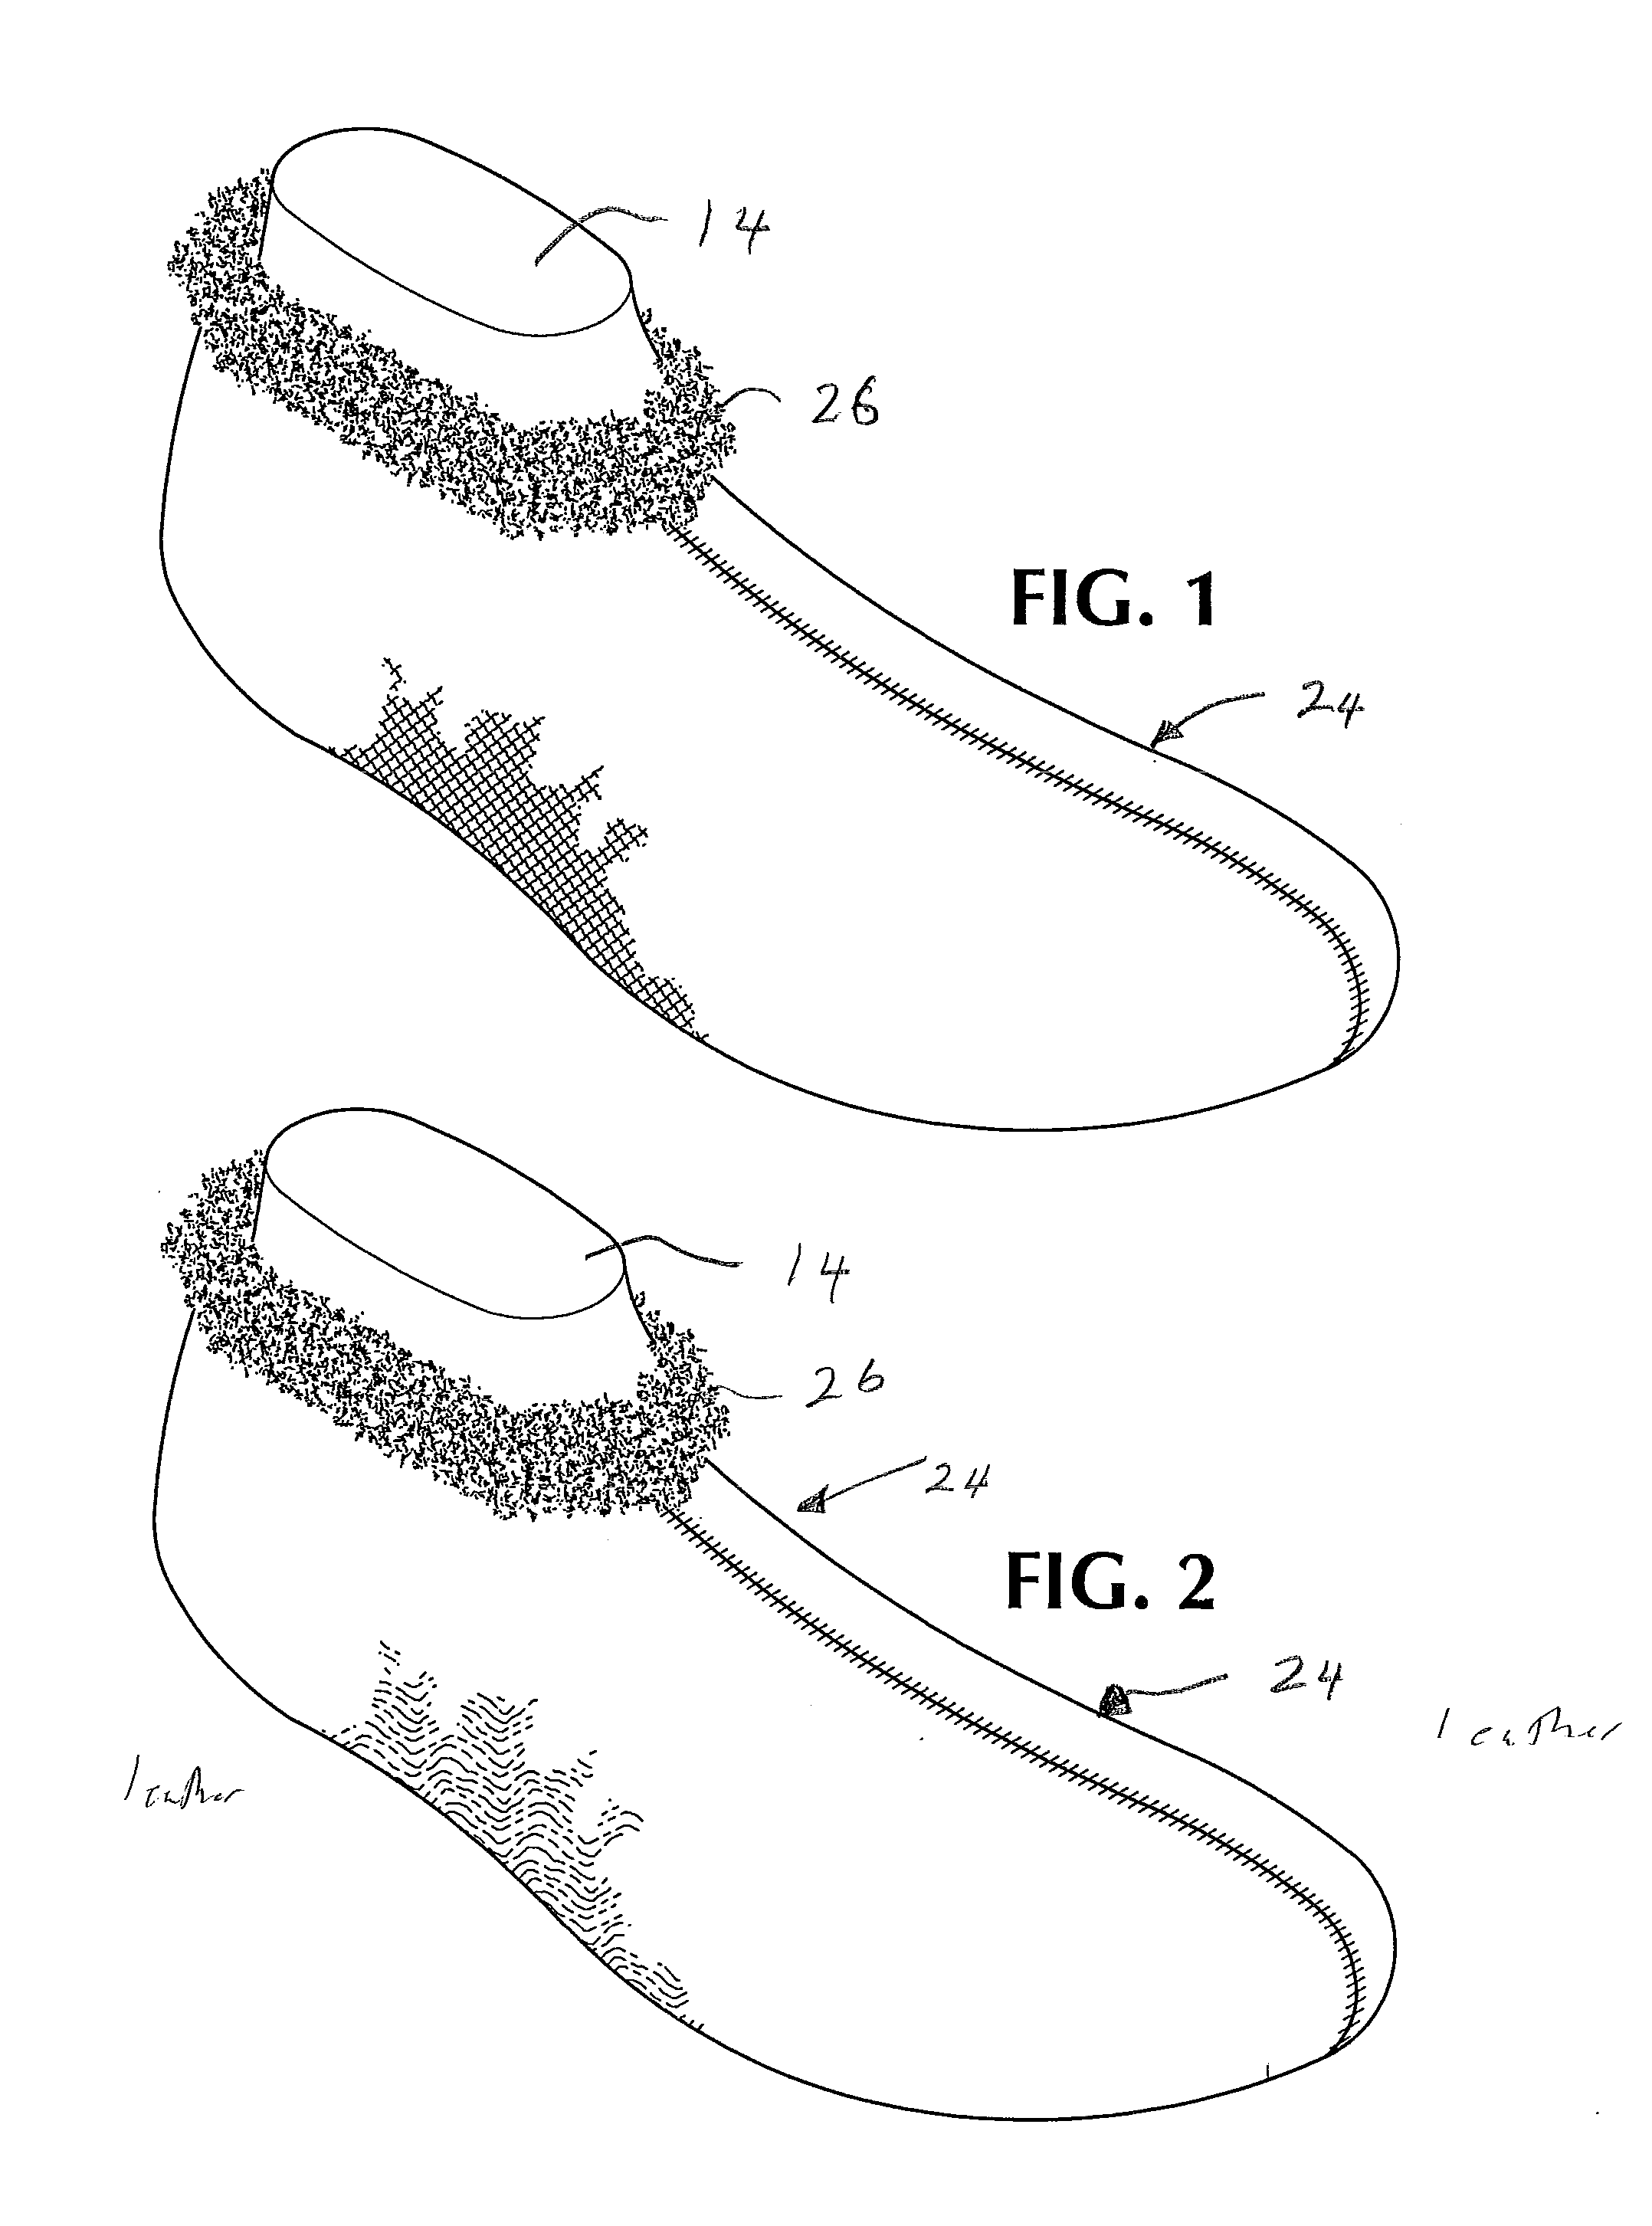 Fur lined injection molded footwear and method of making same